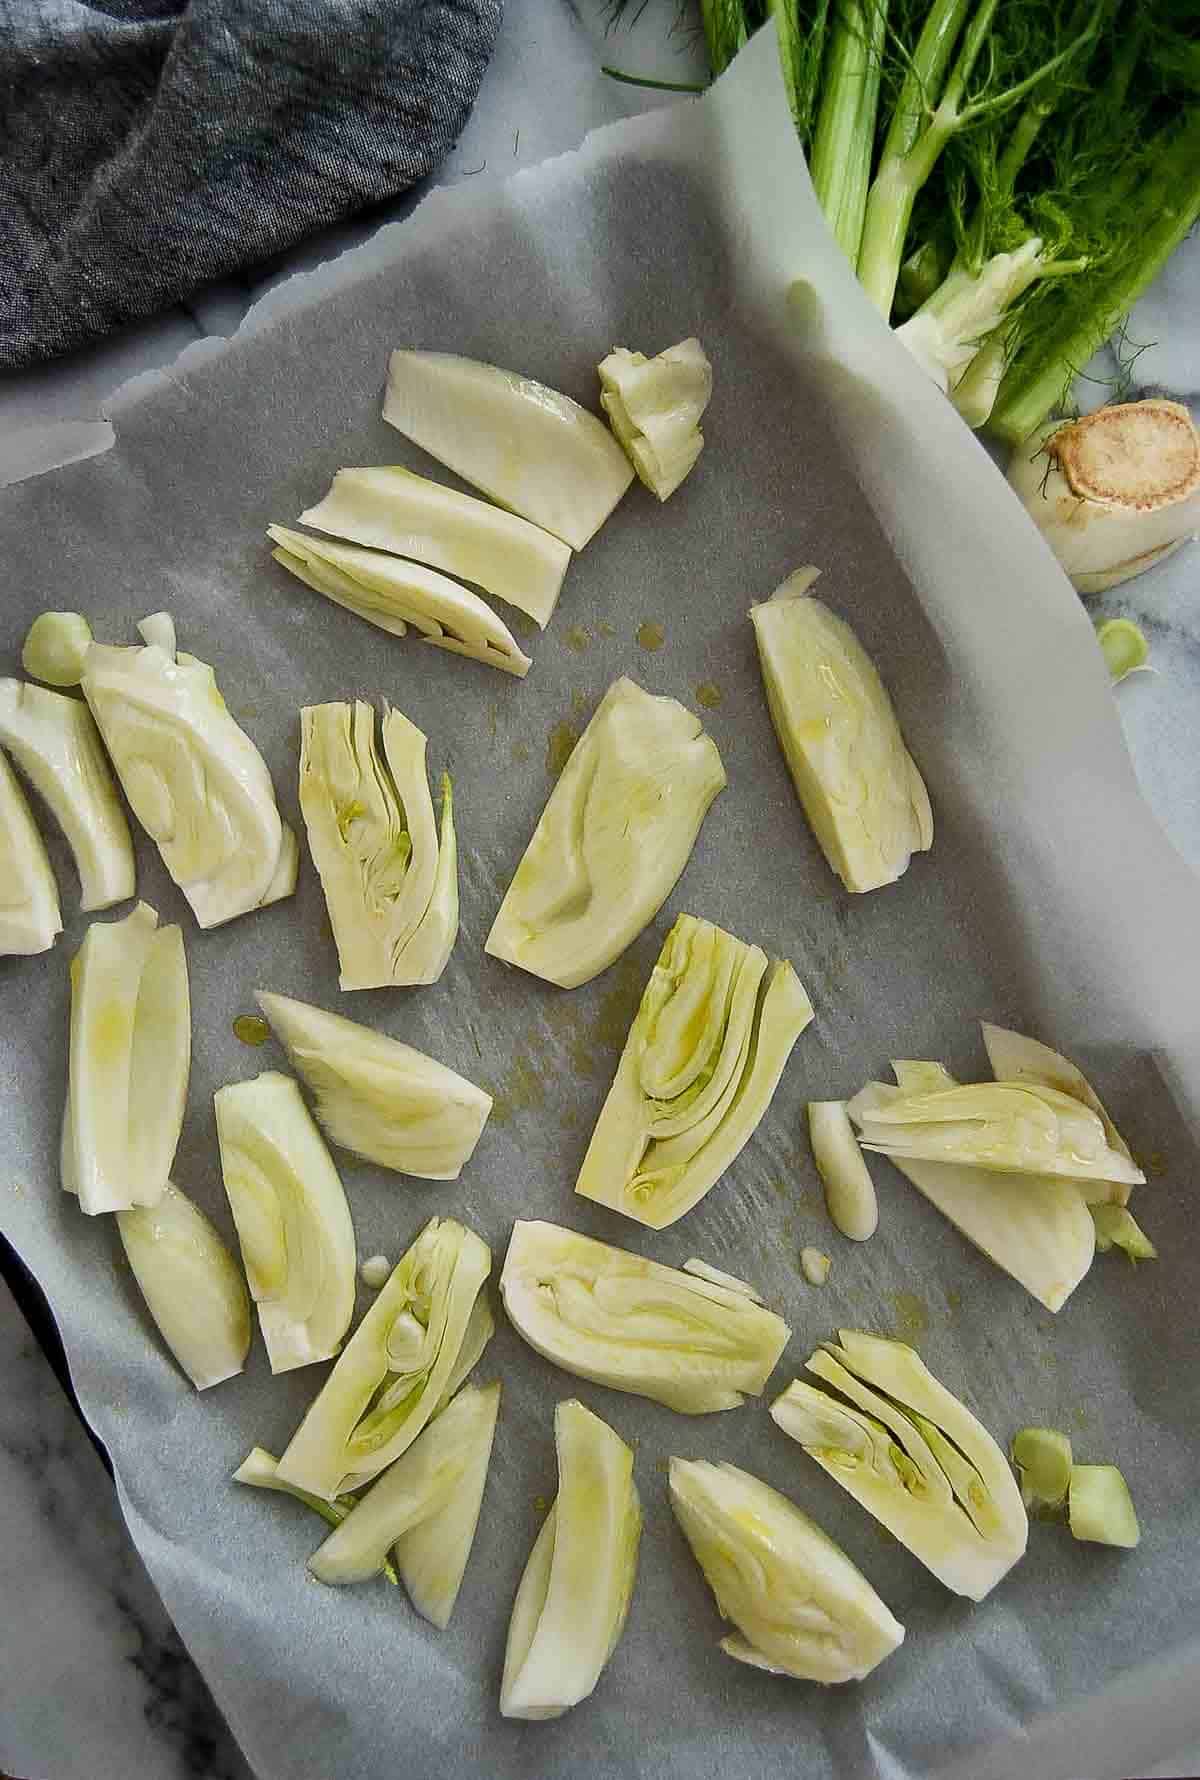 fennel wedges on baking tray.